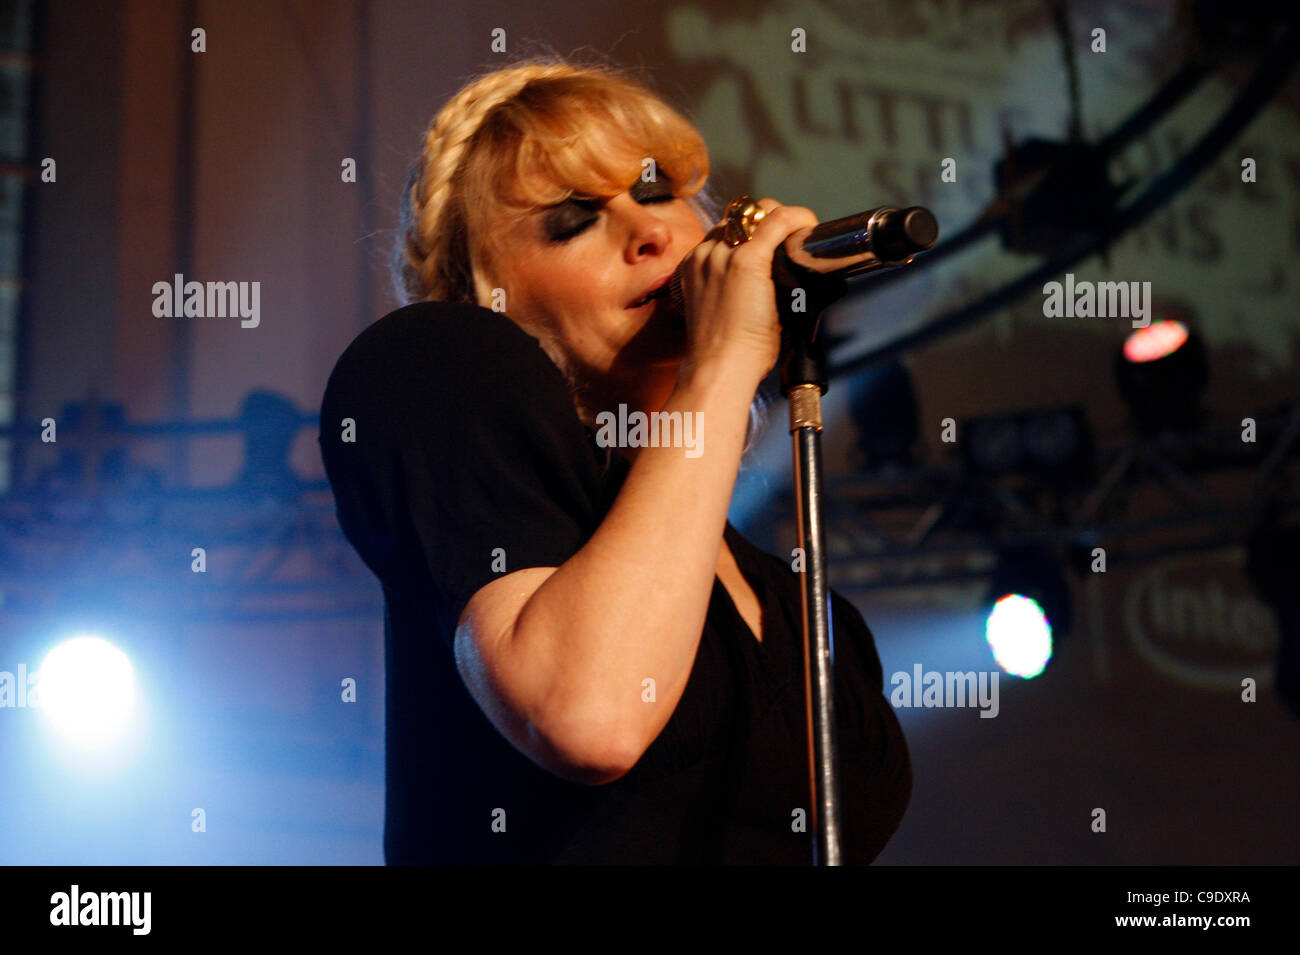 LONDON, UK, 25/11/2011. Goldfrapp play live at Mencap’s Little Noise Sessions in the church of St John-at-Hackney, London. The event is the fourth of six consecutive concerts by various artists in aid of Mencap, a charity working with people with learning disability, their families and carers. Stock Photo